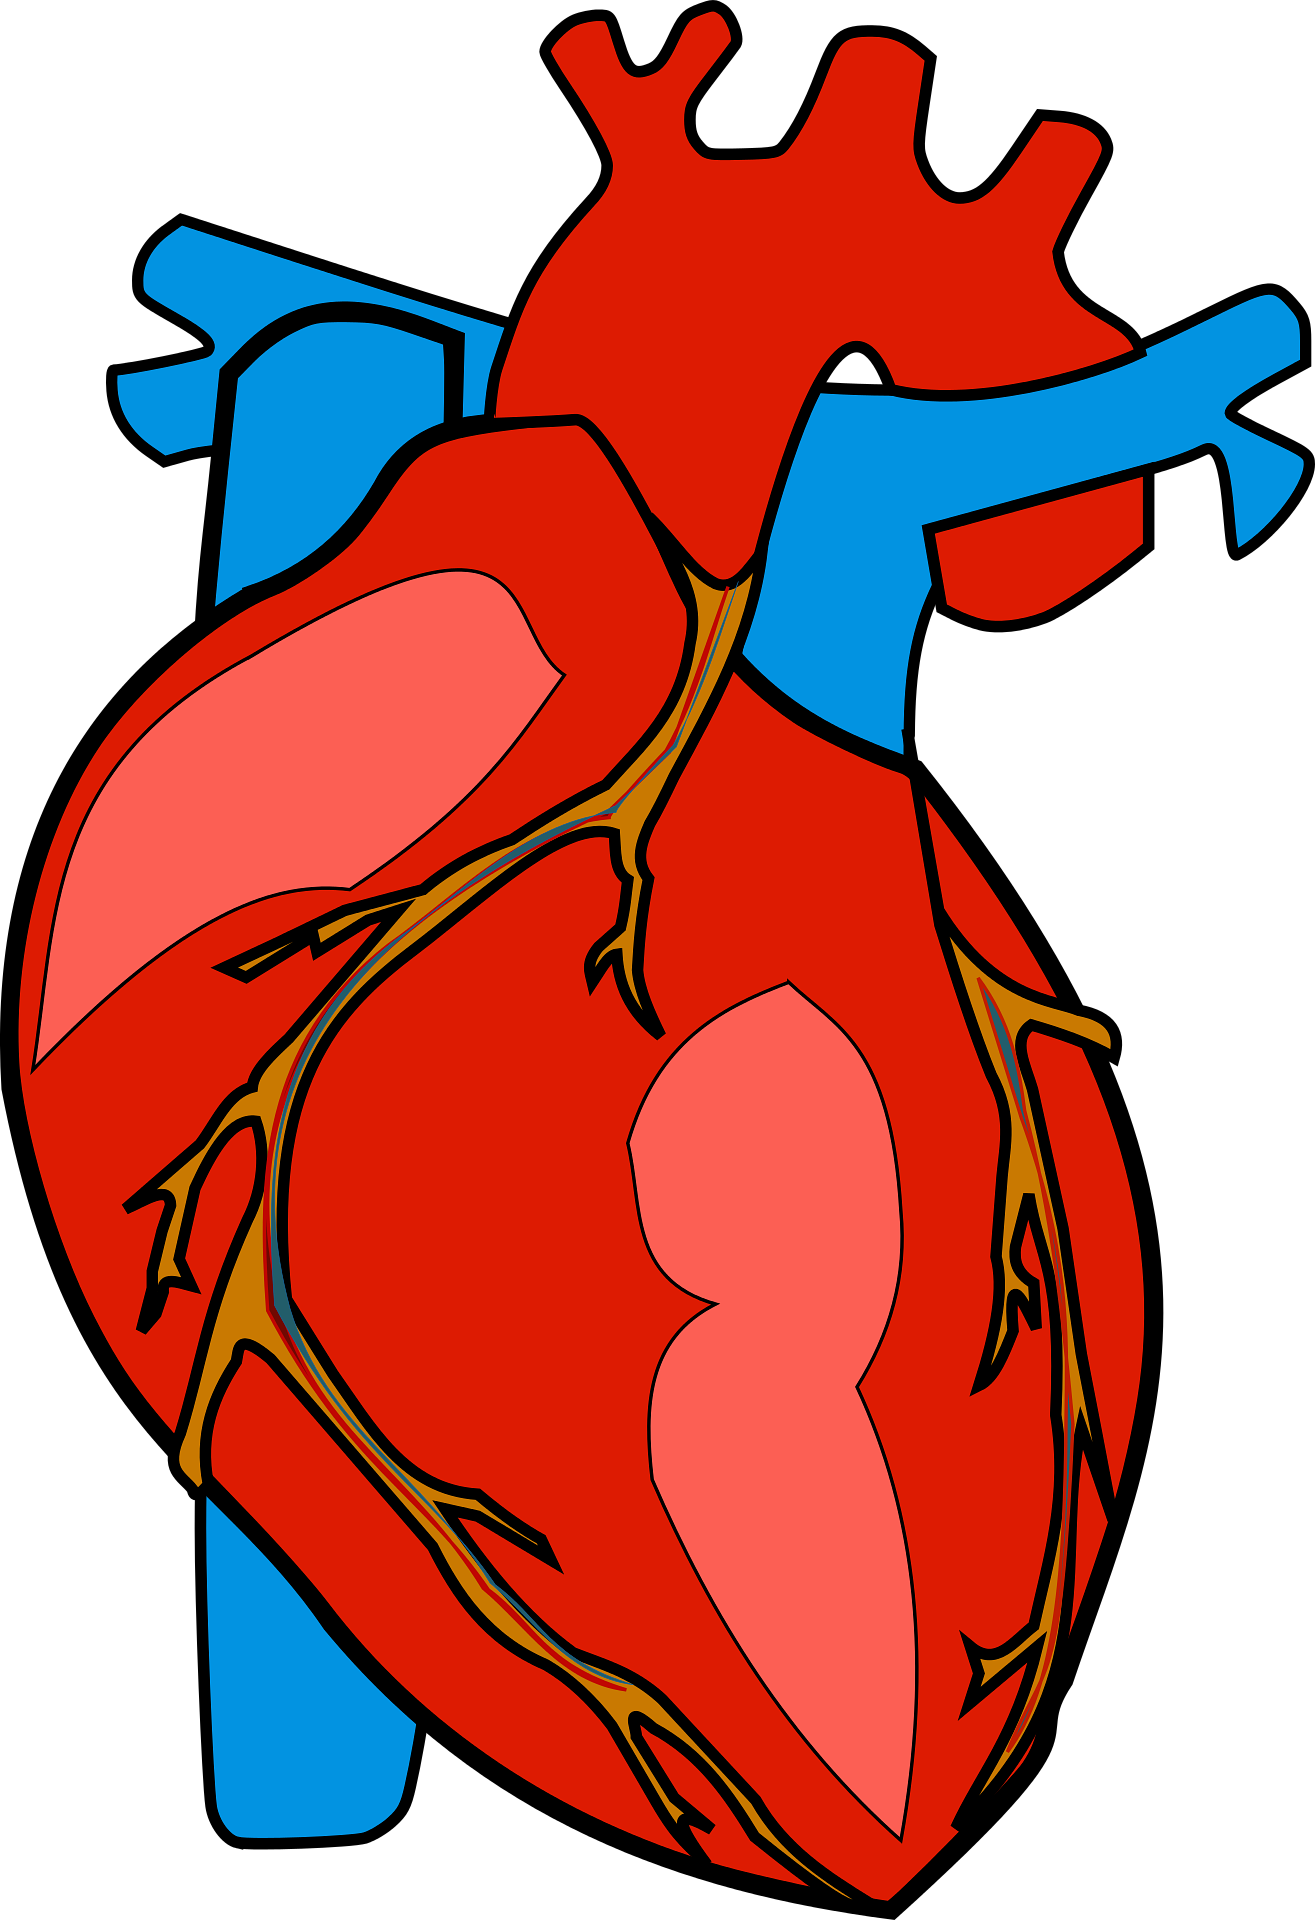 Human heart image or picture